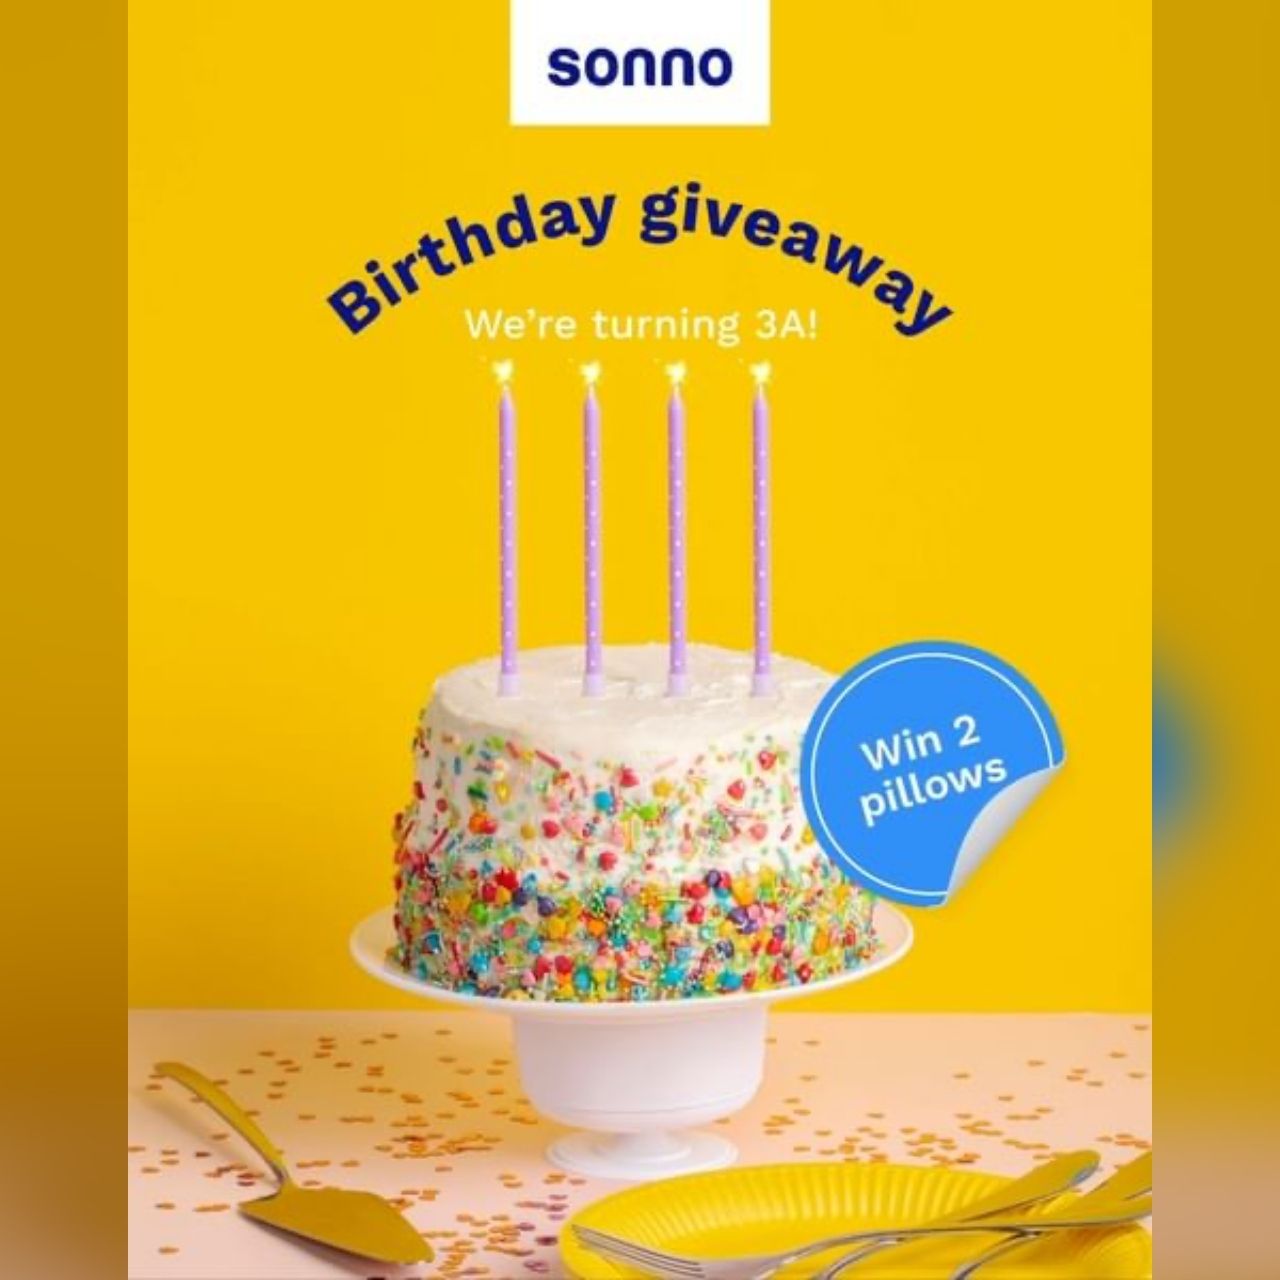 Sonno Birthday Giveaway